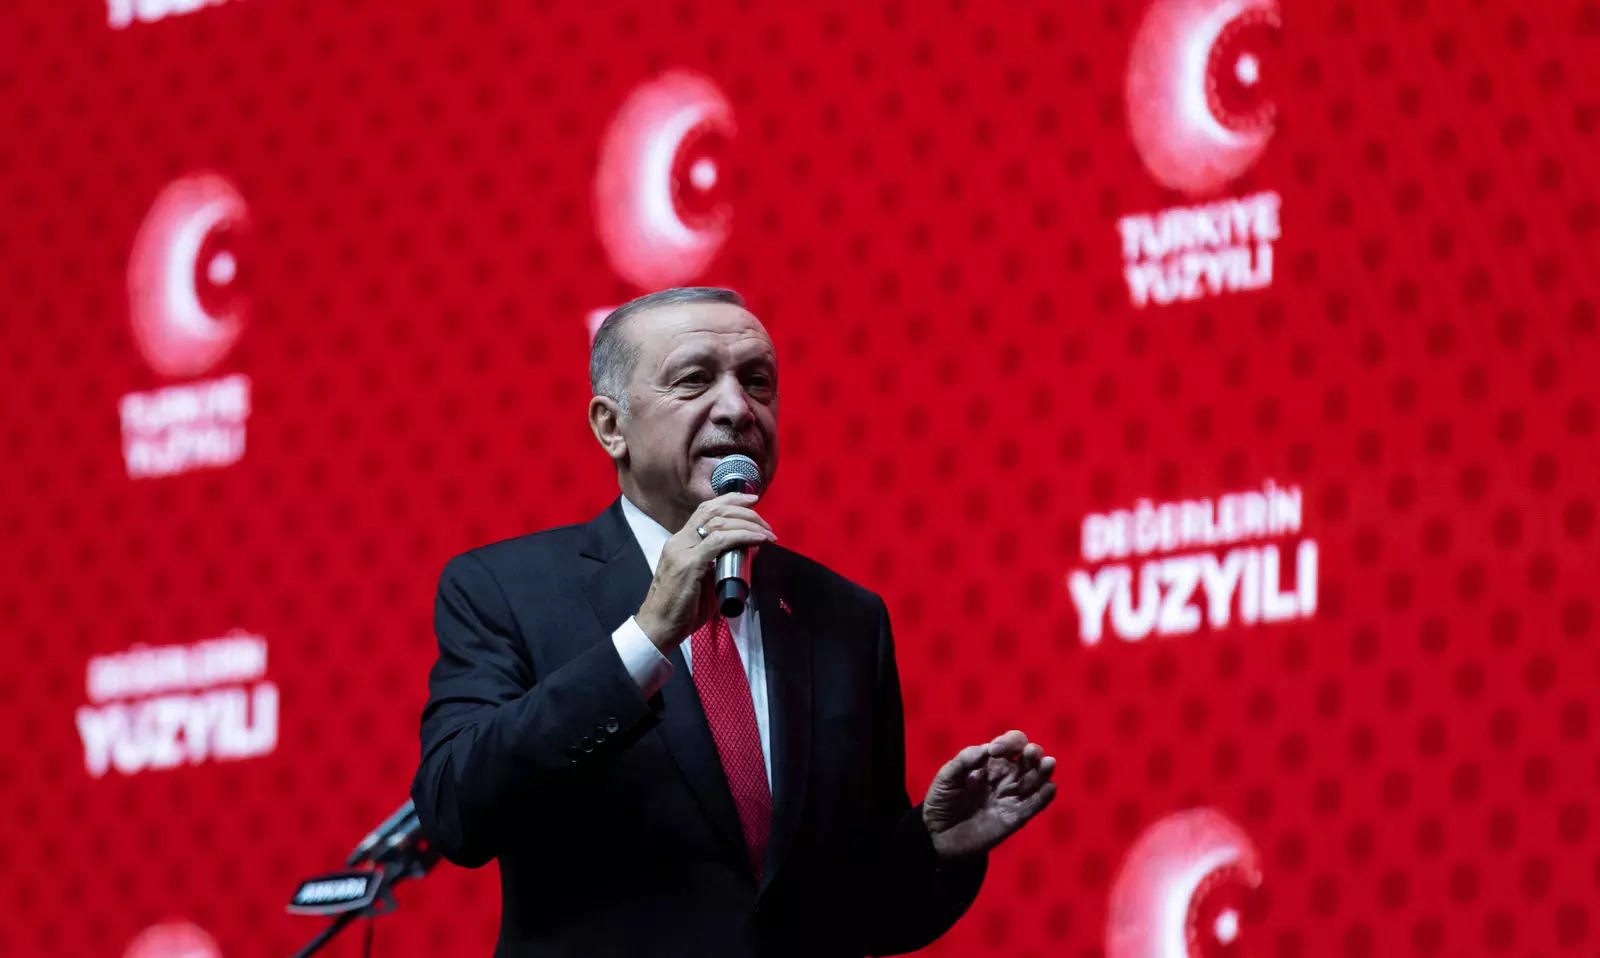 On Wednesday, Turkish President Recep Tayyip Erdogan said at a press conference at the G20 summit in Indonesia: "I am of the opinion that it (the deal) will continue."